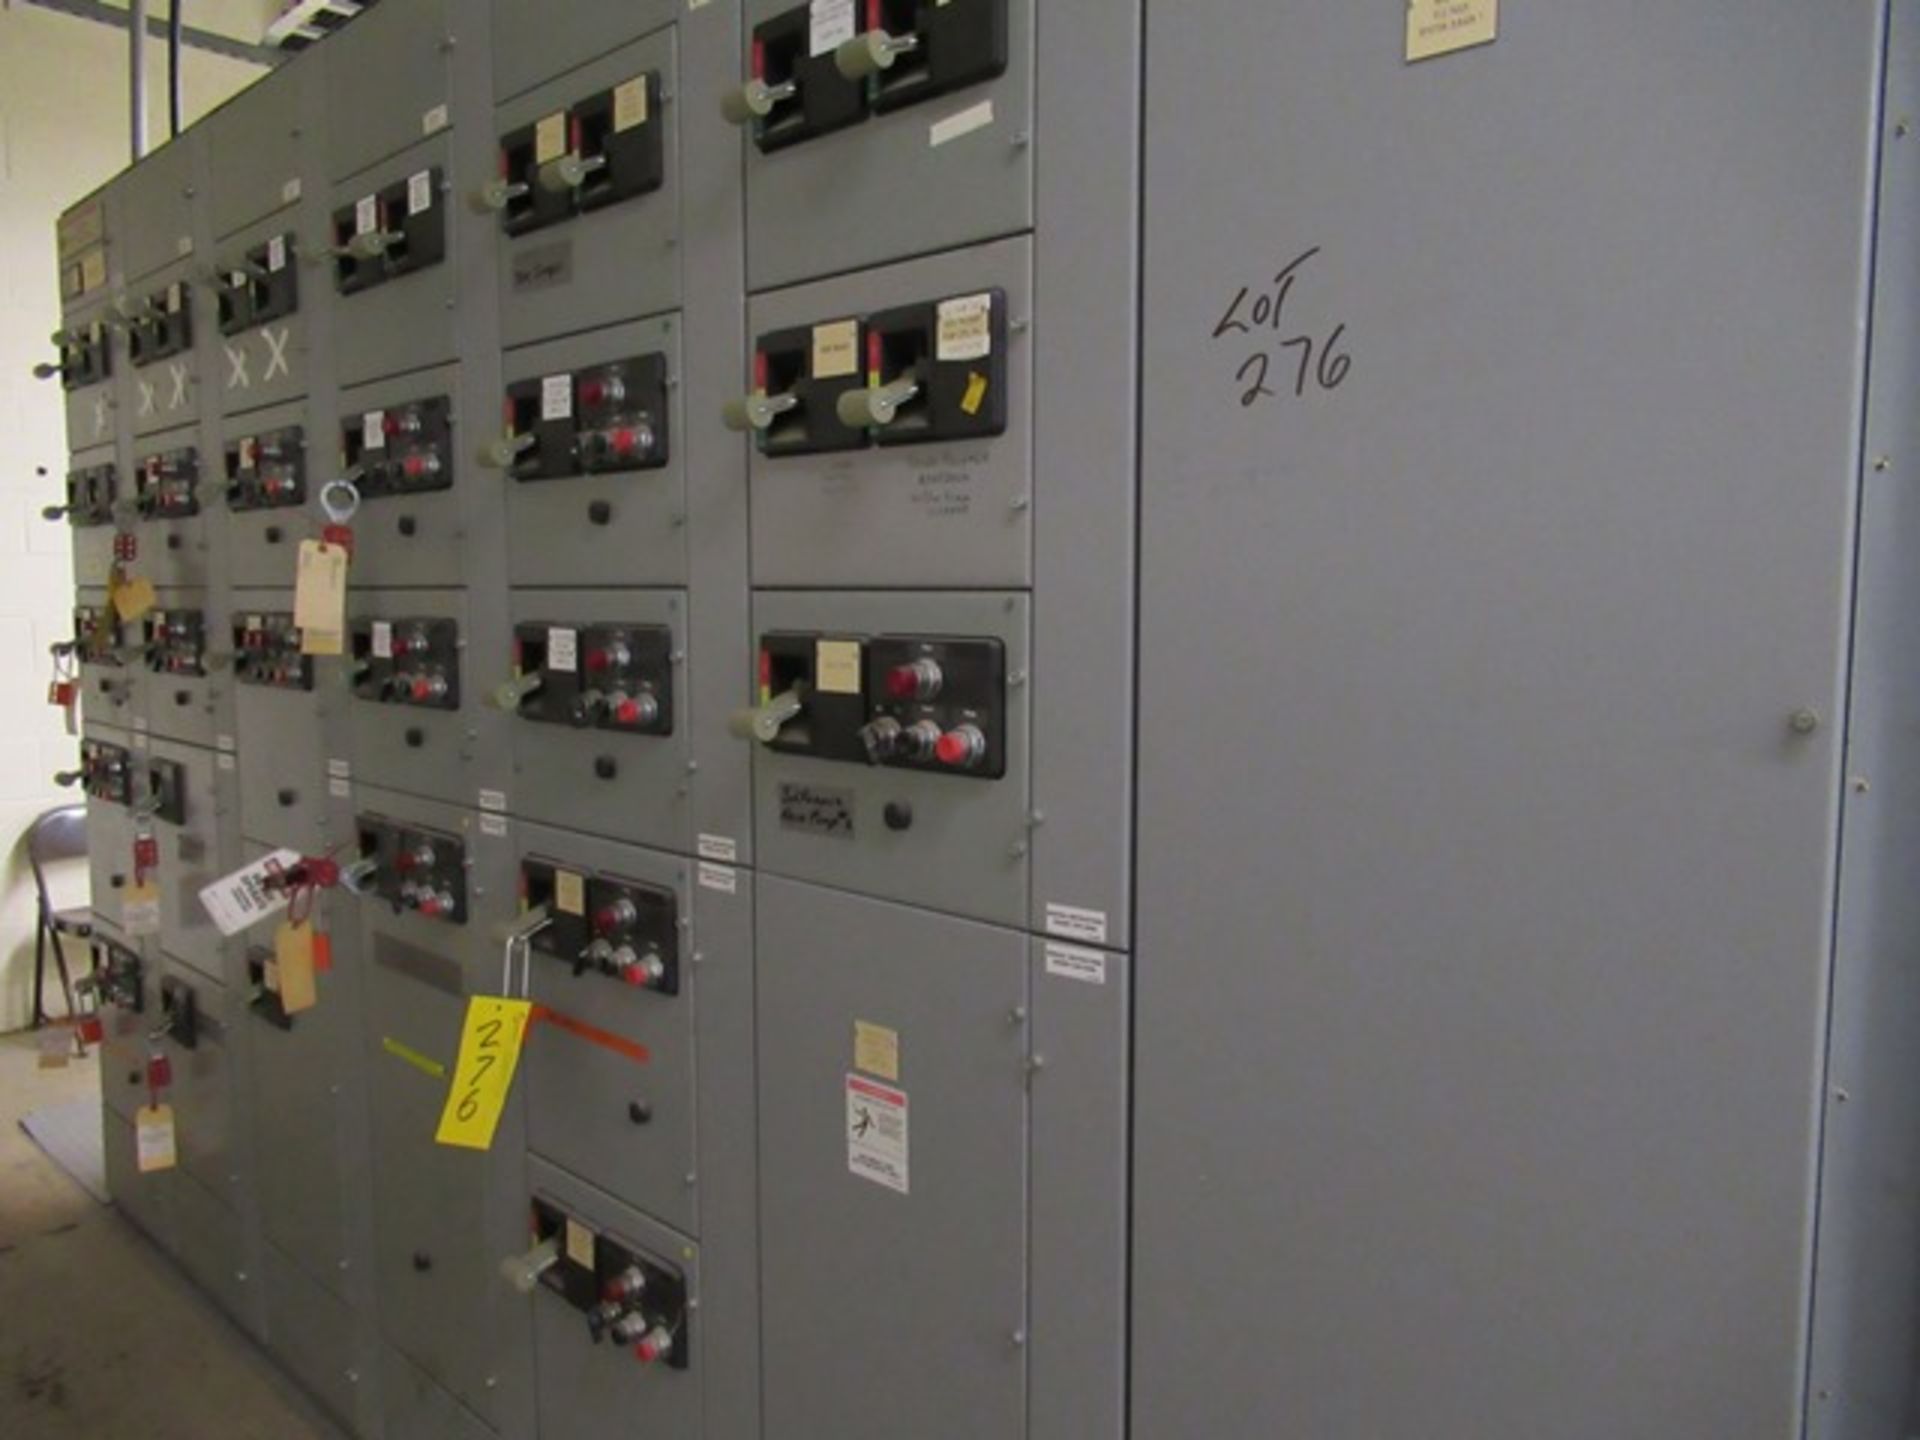 CUTLER-HAMMER SERIES 2100 MOTOR CONTROL 300-1200 AMP CENTER W/26 SWITCH PANELS. (DELAYED